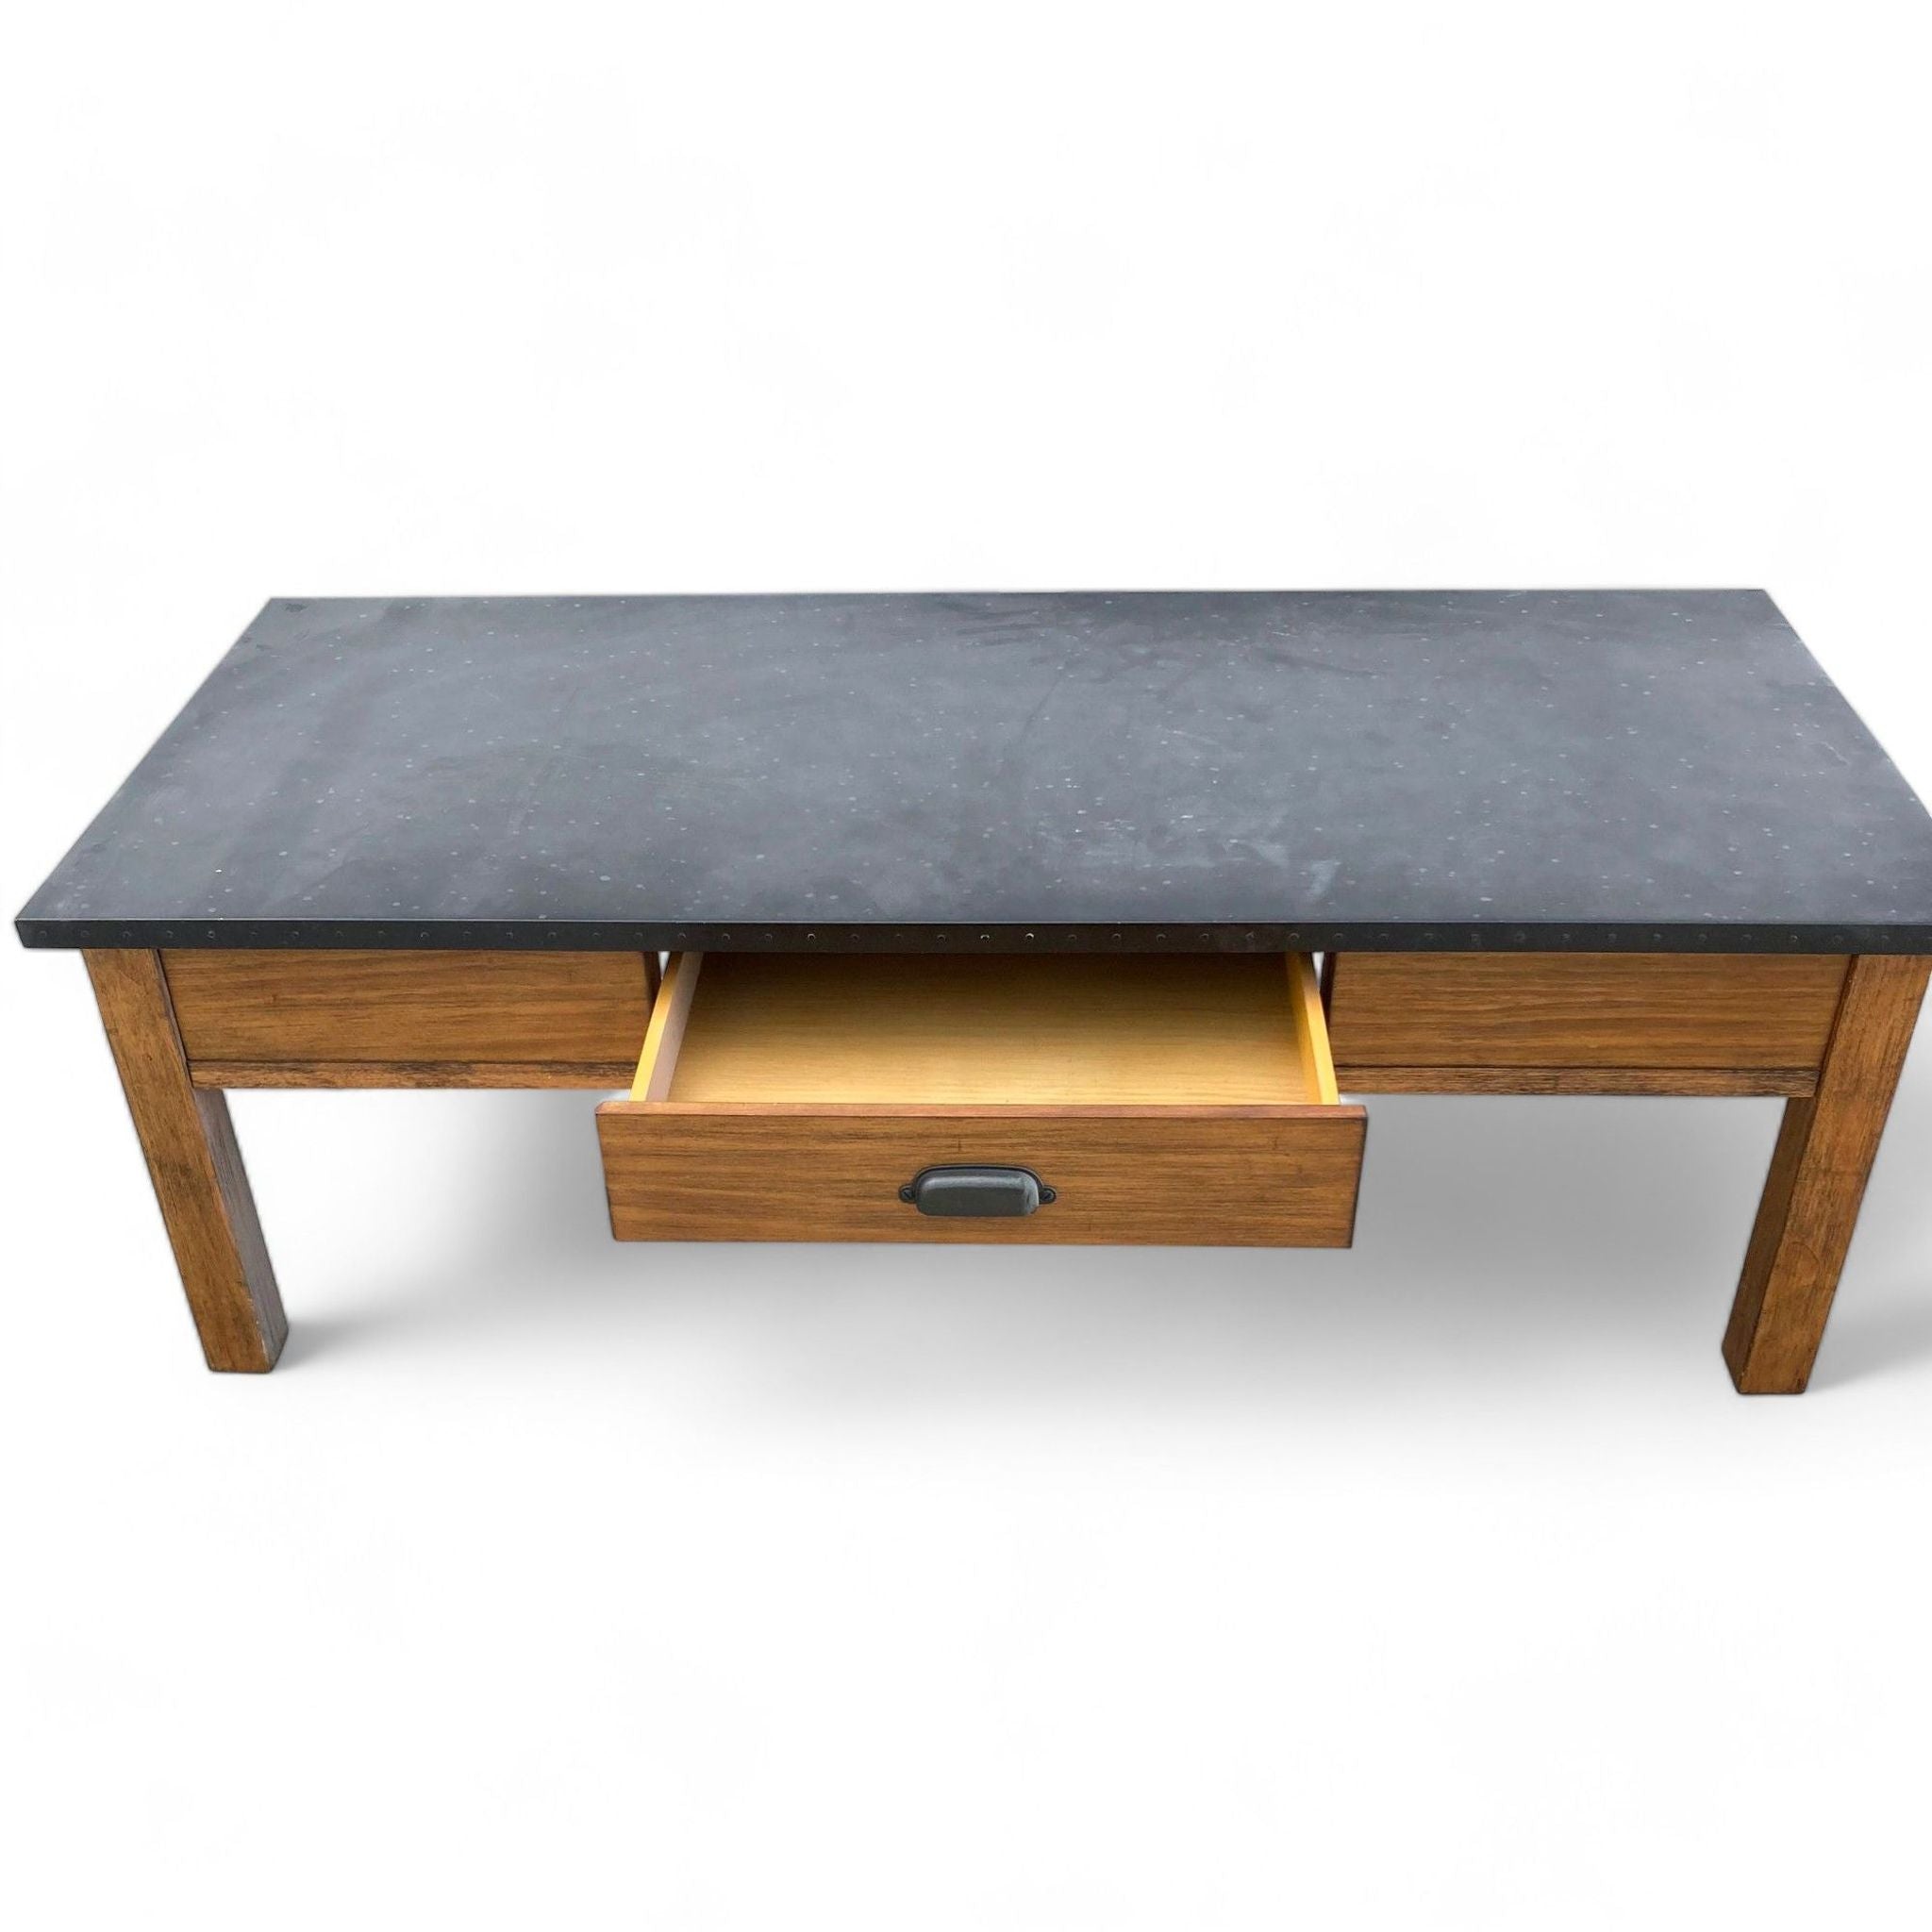 Drawer open on Reperch wooden coffee table with slate top, showcasing storage, against a white backdrop.